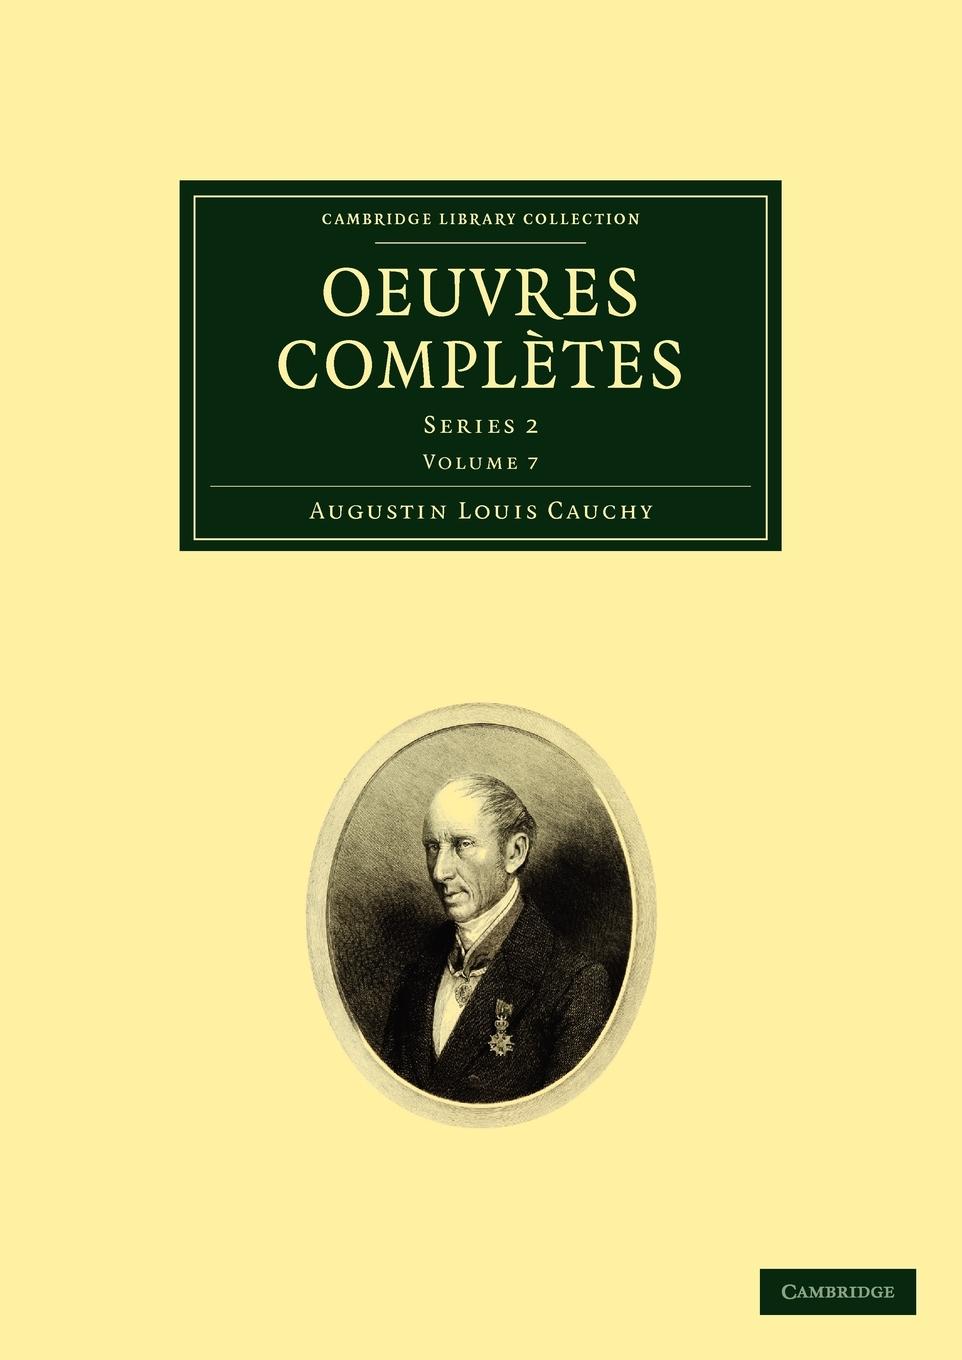 Oeuvres completes - Cauchy, Augustin Louis